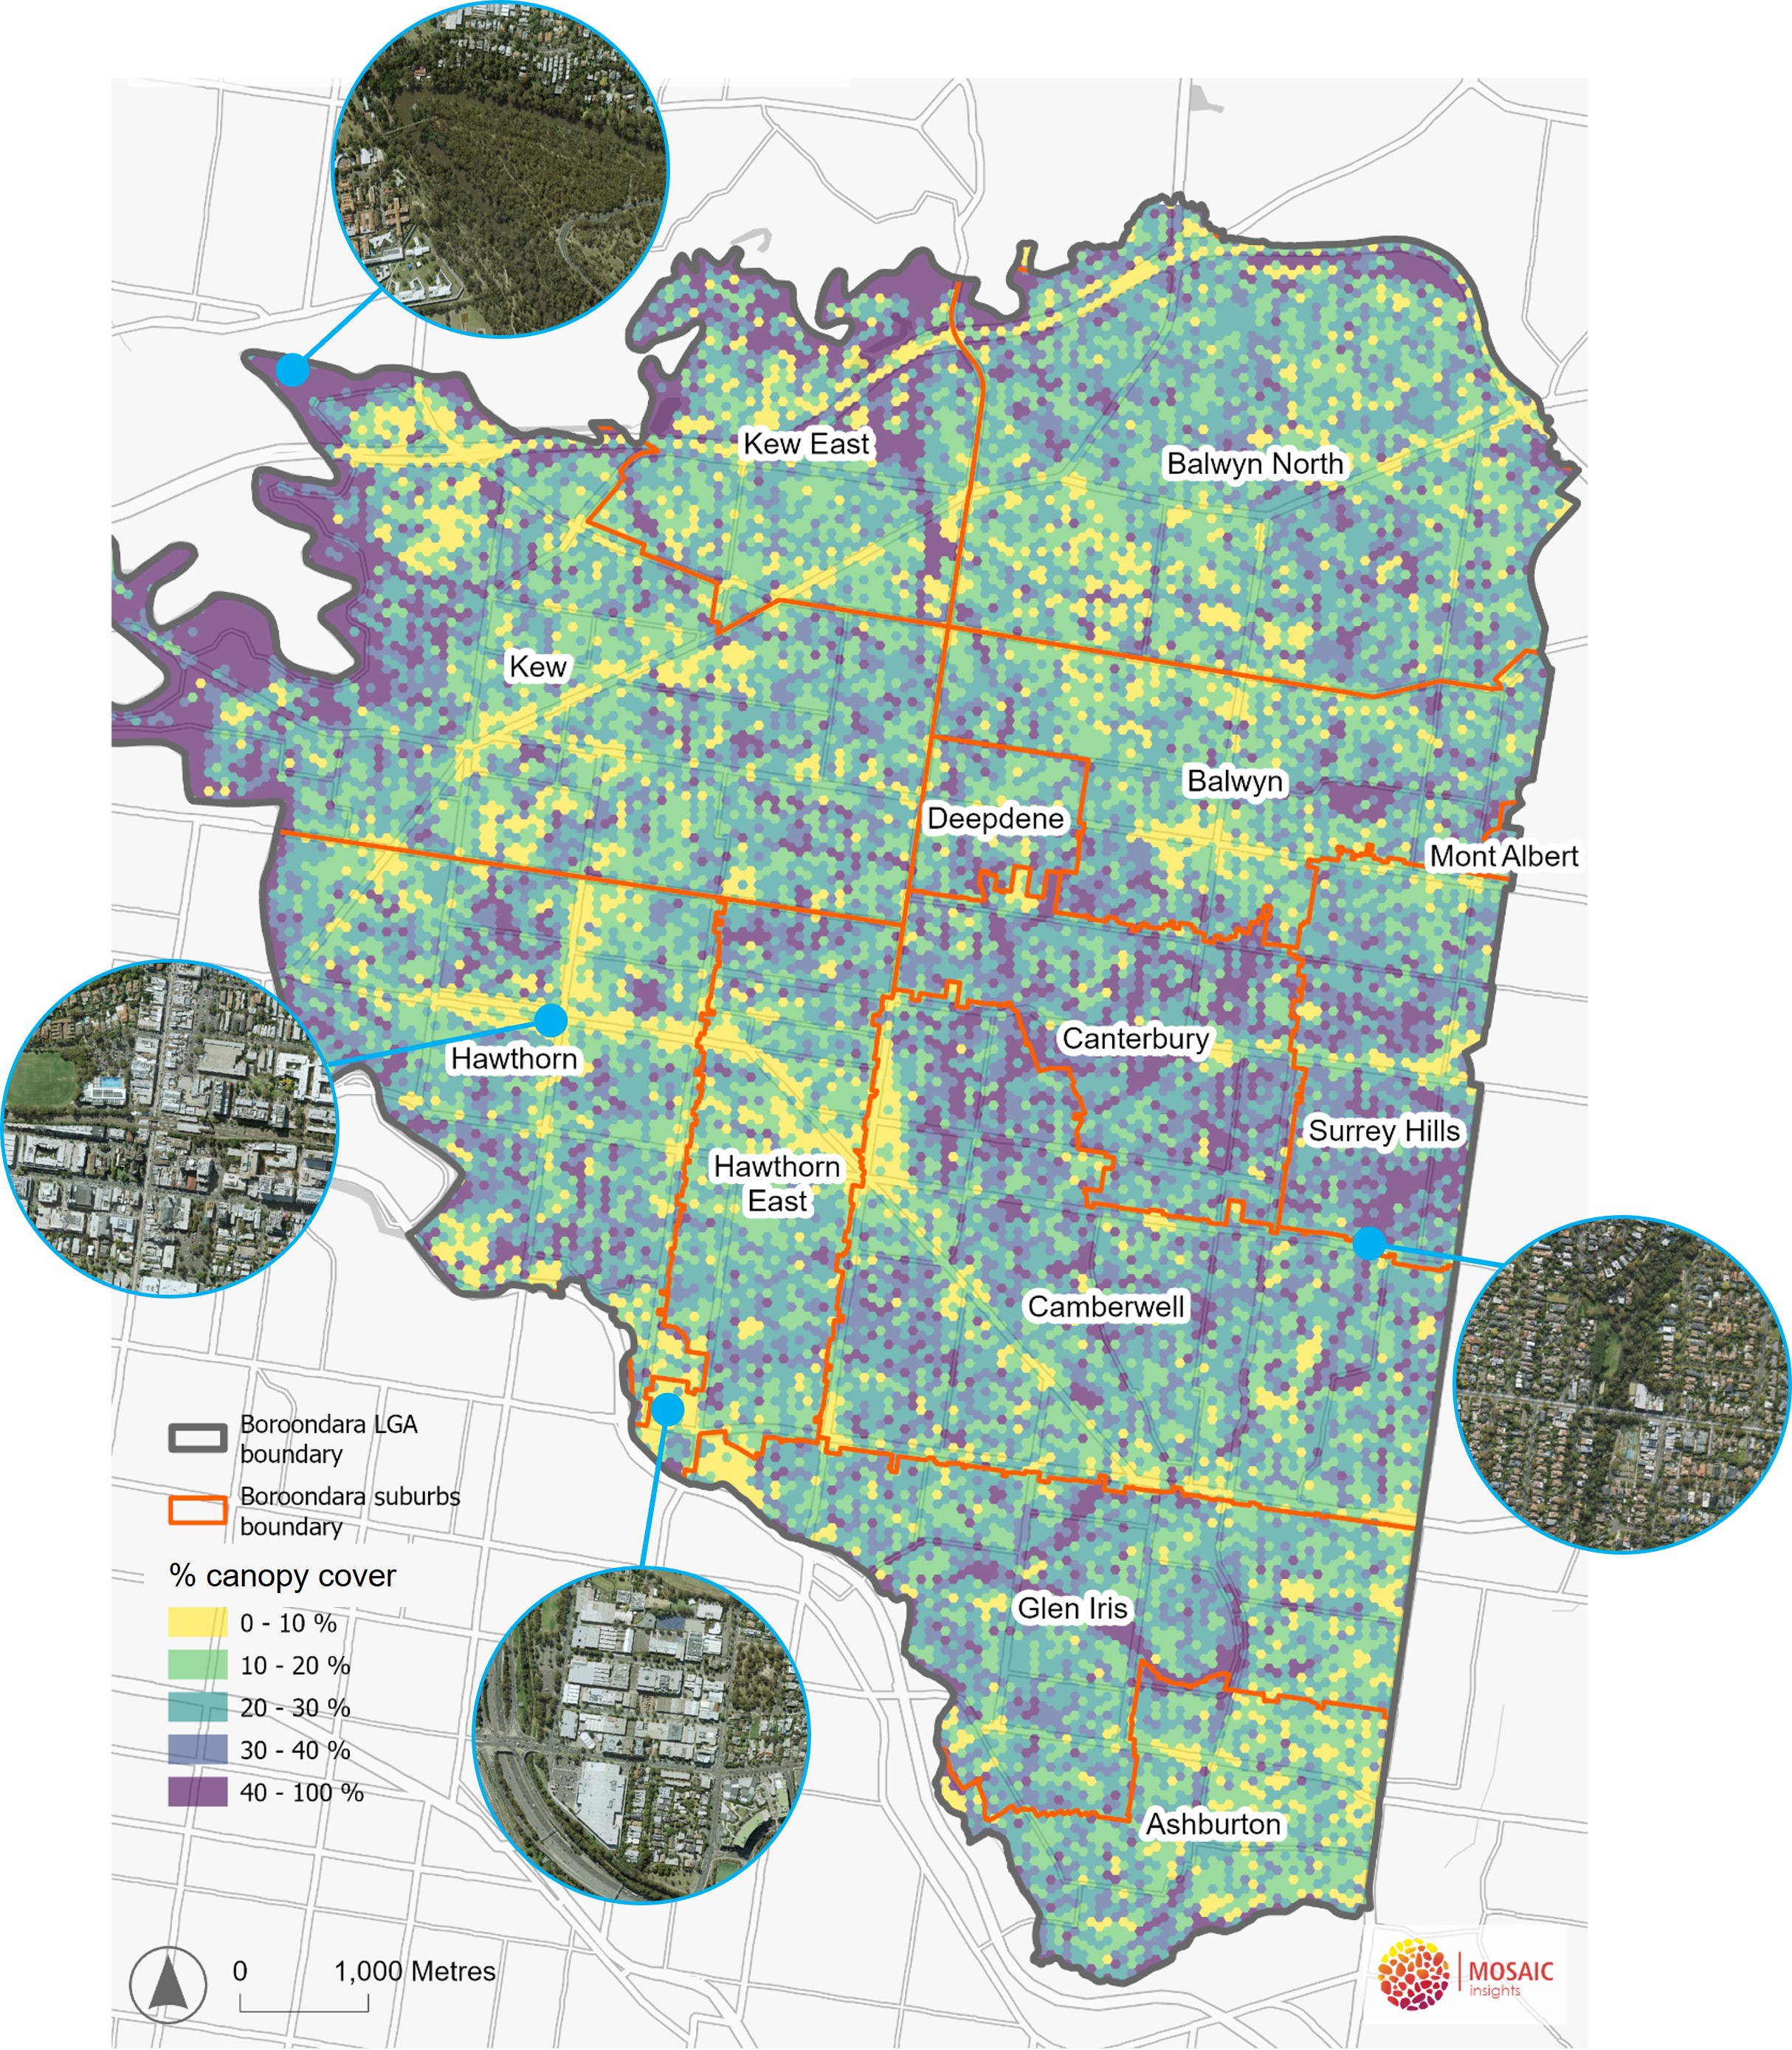 Map of tree canopy cover across all of Boroondara. Smaller inset aerial images show 2 areas of high canopy cover, one along the Yarra River in Kew and one along Back Creek in Surrey Hills. Smaller inset aerial images also show 2 areas of low canopy cover, one in the south-west corner of Hawthorn East that includes the commercial area between the Monash Freeway and Tooronga Road, and one in Hawthorn at the intersection of Burwood and Glenferrie roads. 